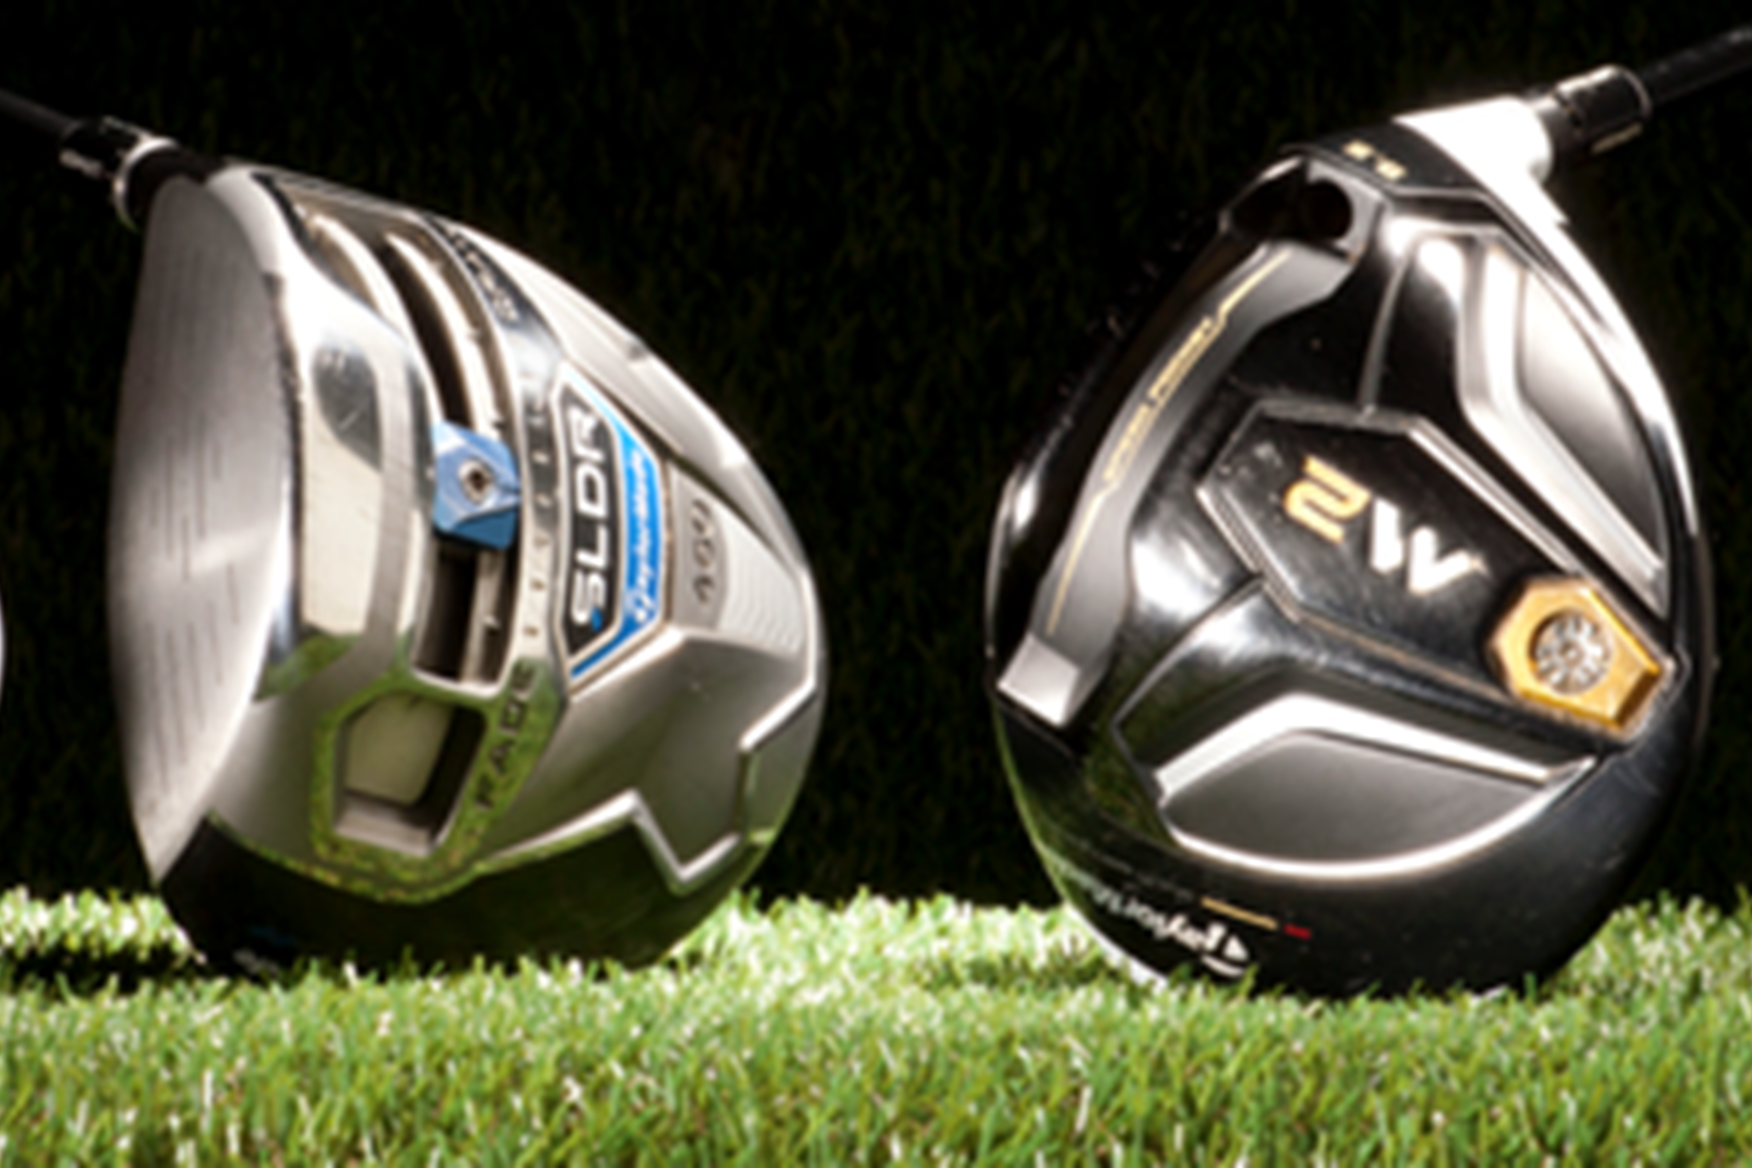 rbz stage 2 driver review golf digest